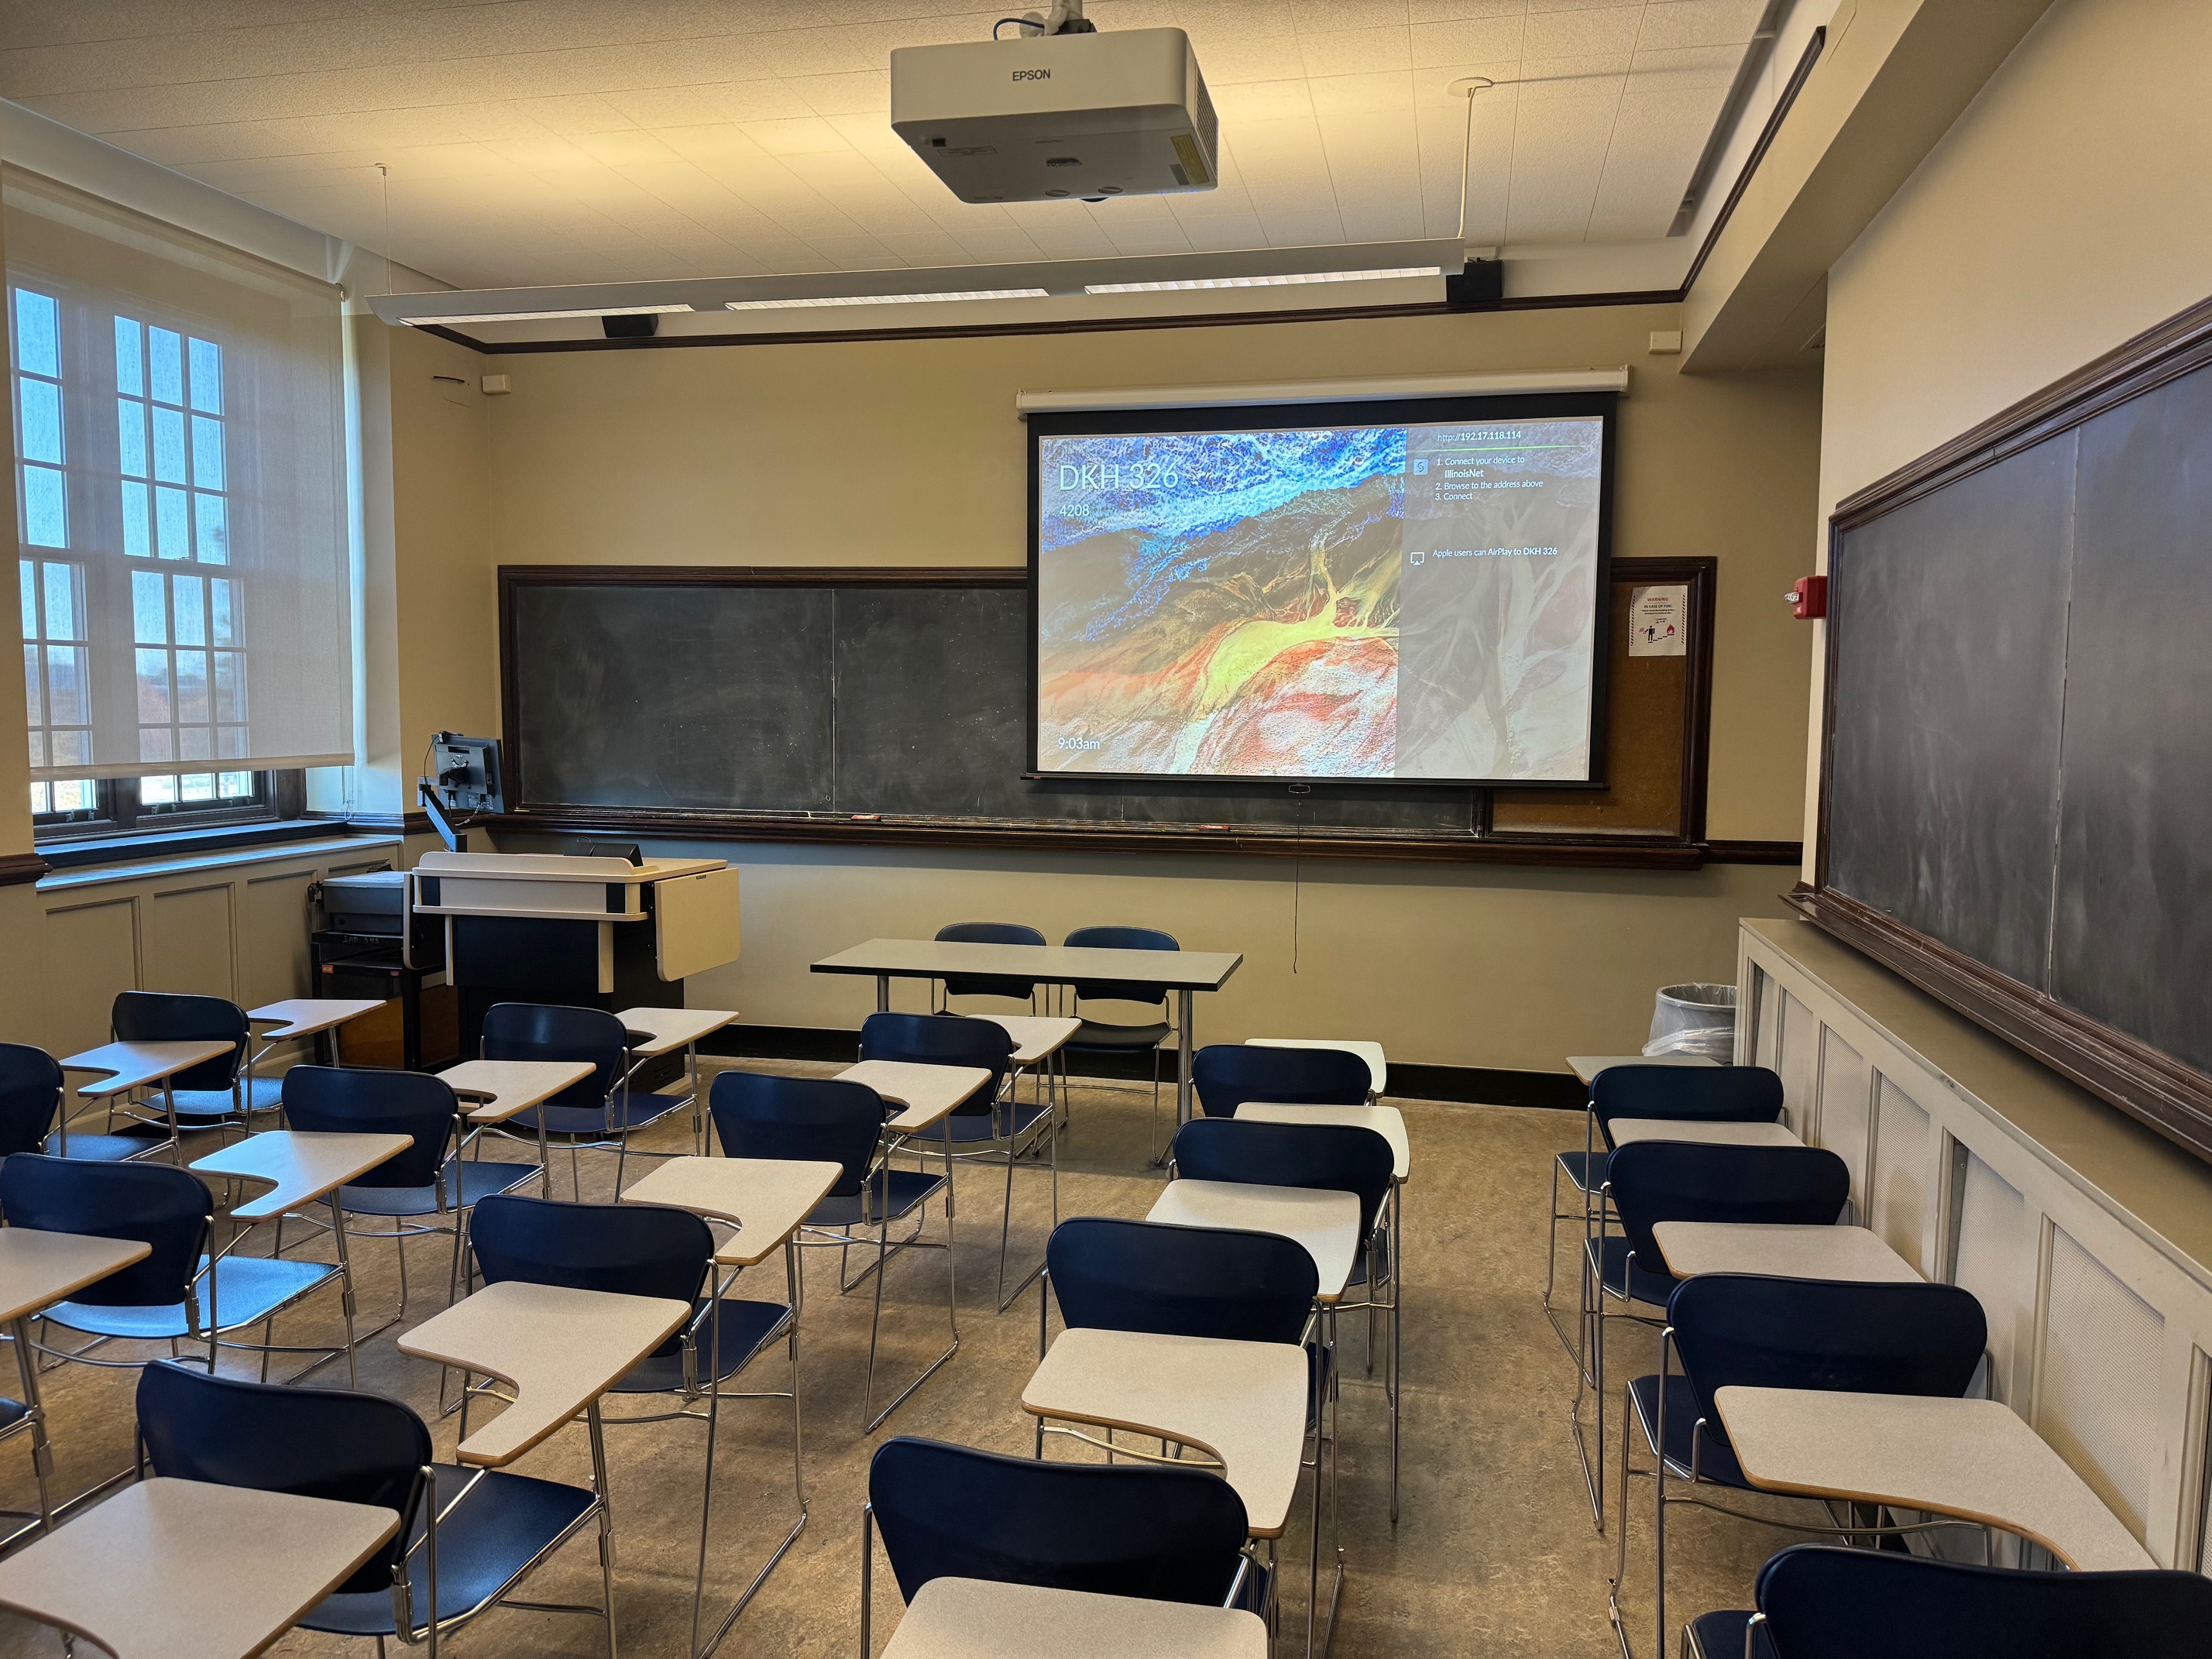 A view of the classroom with tiered sloped seating, chalkboard, and instructor table in front.